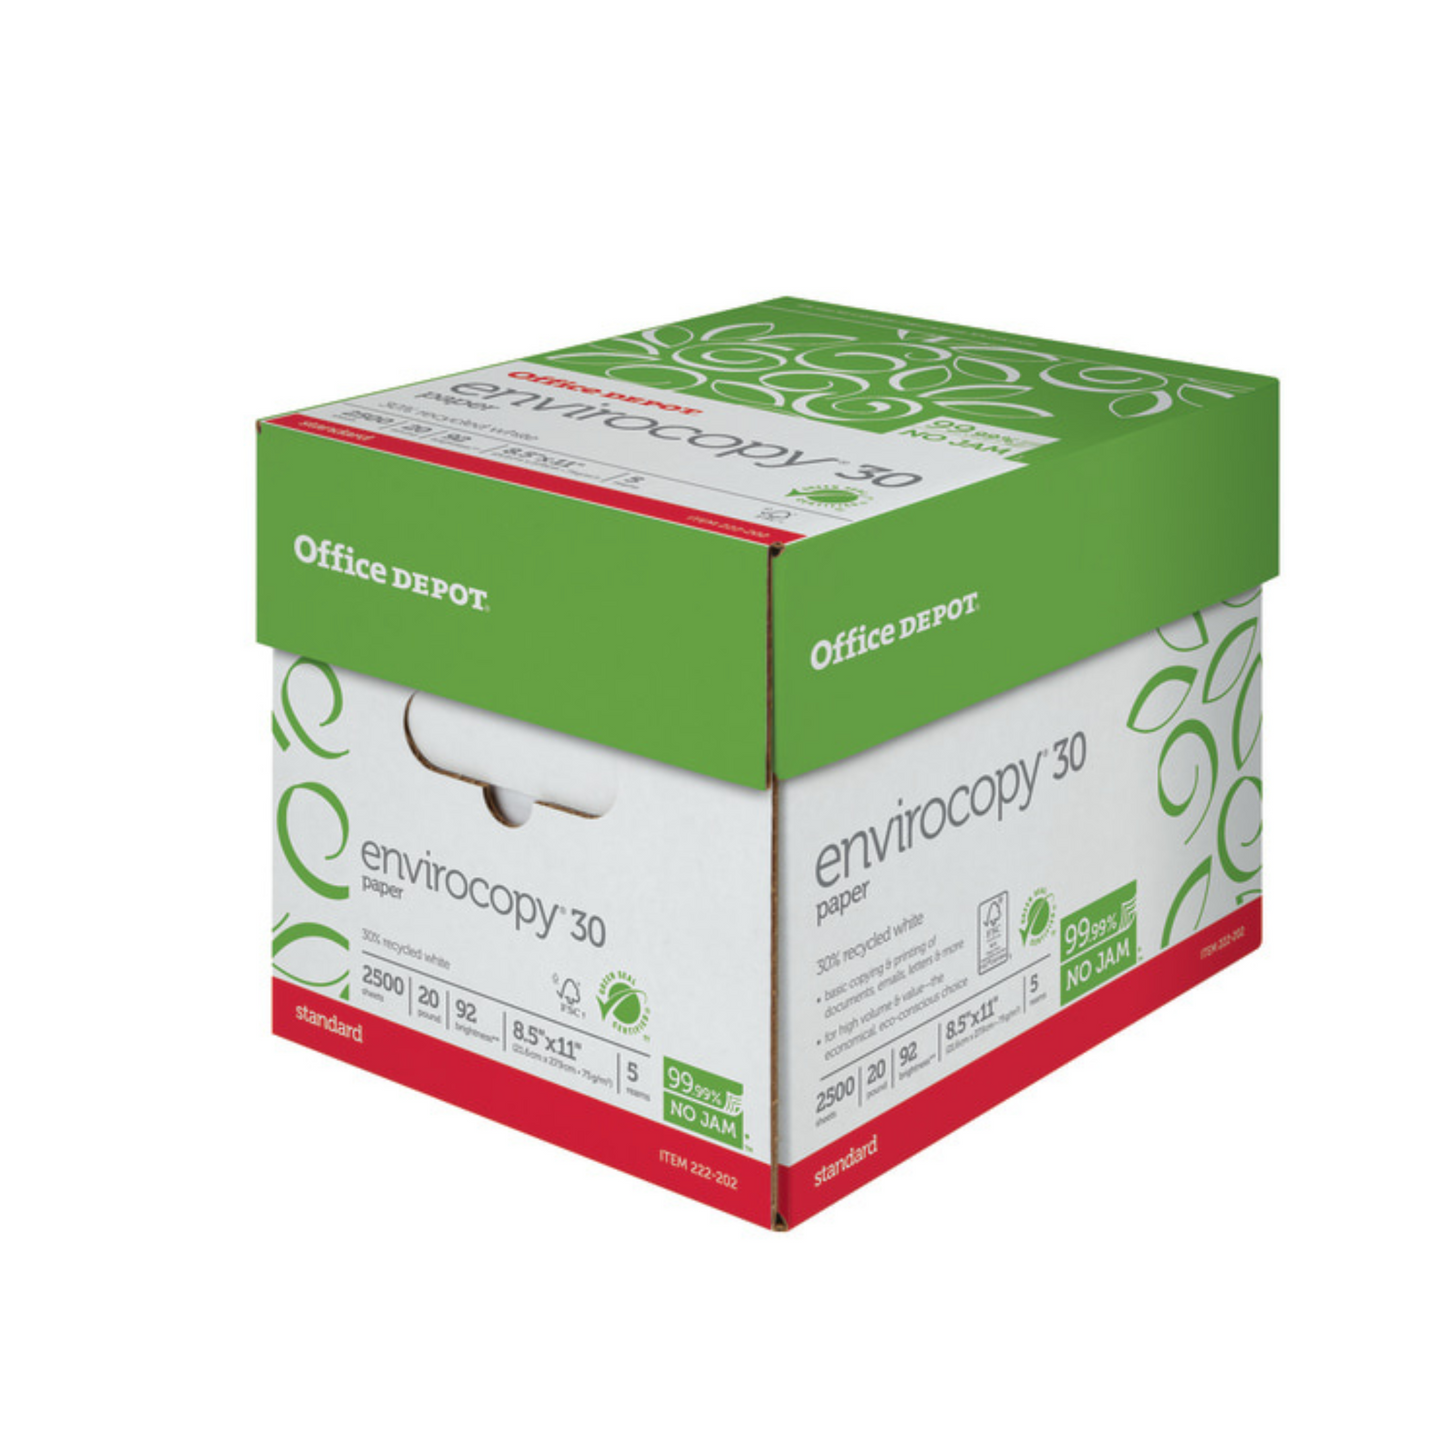 Office Depot Brand Enviro Copy Paper, Letter Size 20 lbs, 8 1/2 x 11, White, 2500 Sheets/5 reams in a Carton